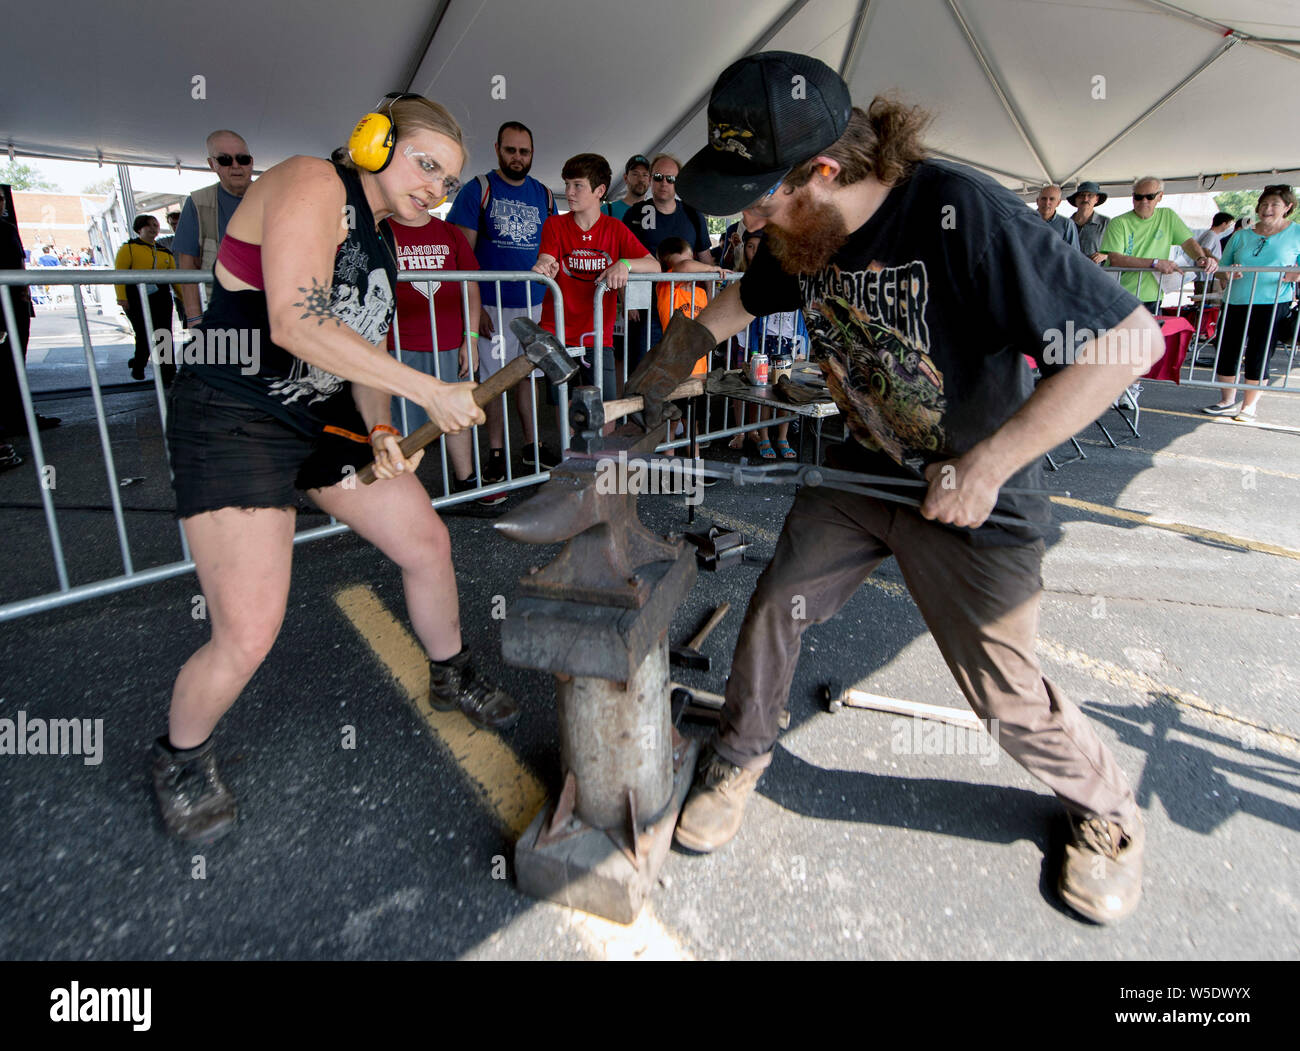 Dearborn, Michigan, USA. 28th July, 2019. MEGAN GRIERSON and AARON DESHIELDS demonstrate blacksmithing during the 10th Annual Maker Faire Detroit at the Henry Ford Museum of American Innovation. Maker Faire is a gathering of tech enthusiasts, tinkerers, engineers and science club members who gather to show and share knowledge about what they've made. Credit: Brian Cahn/ZUMA Wire/Alamy Live News Stock Photo